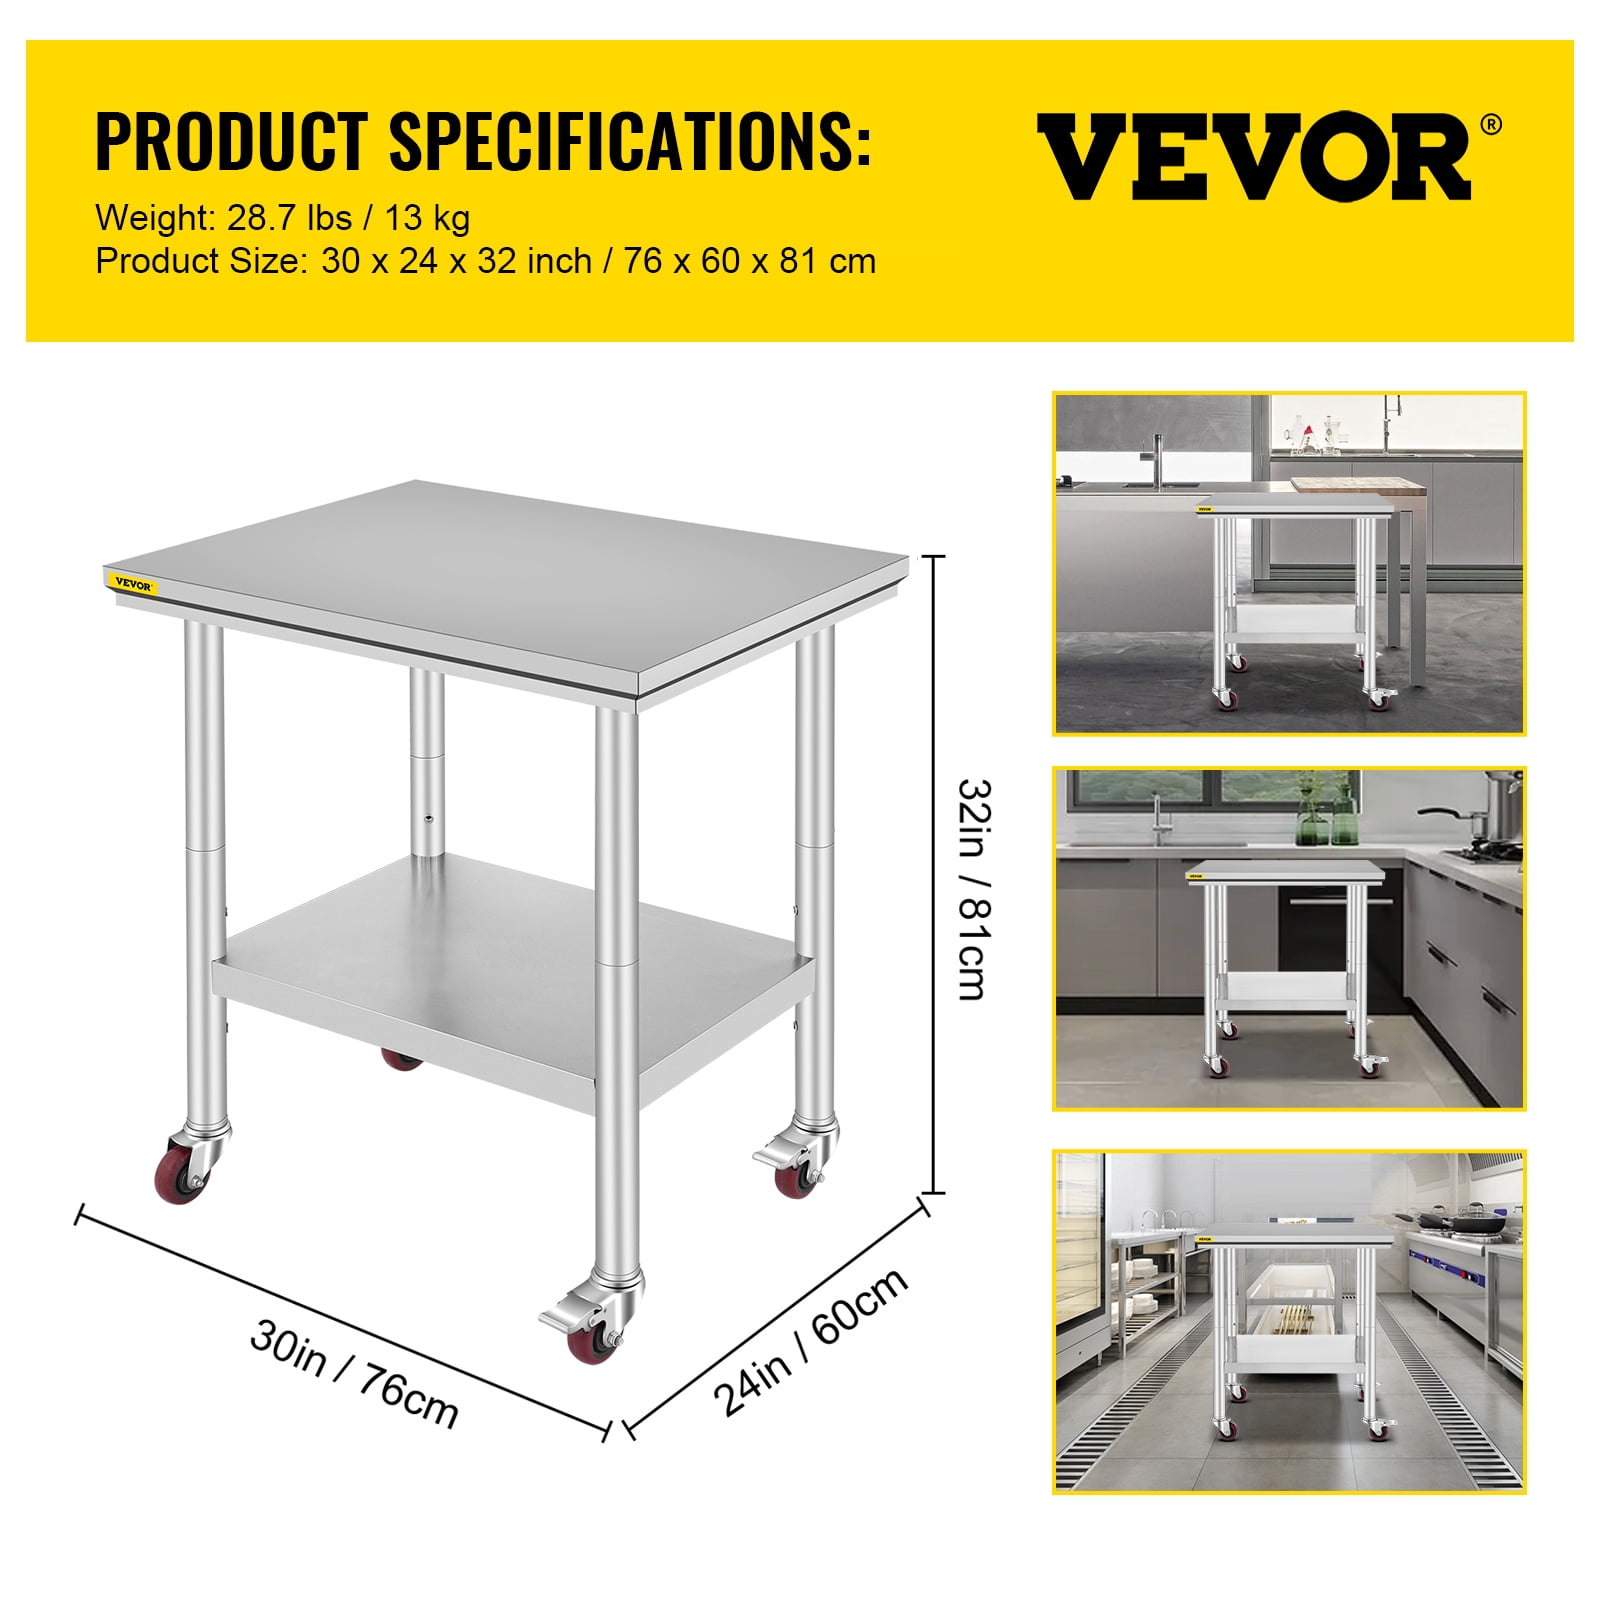 VEVOR 24"x30" Commercial Stainless Steel Heavy Duty Food Prep Work Table Kitchen 